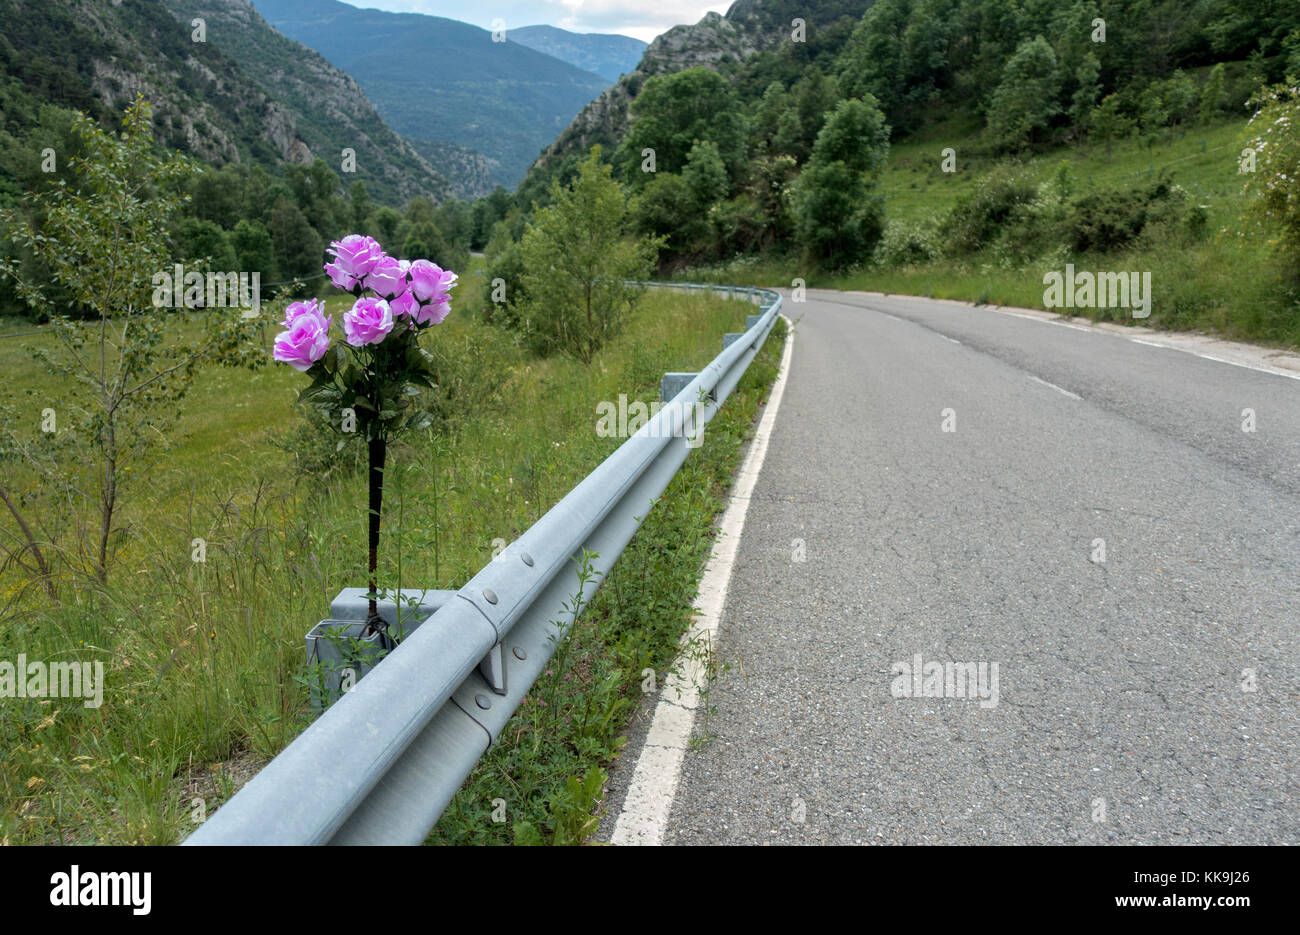 Flowers for a death person in a car accident.Spain Stock Photo